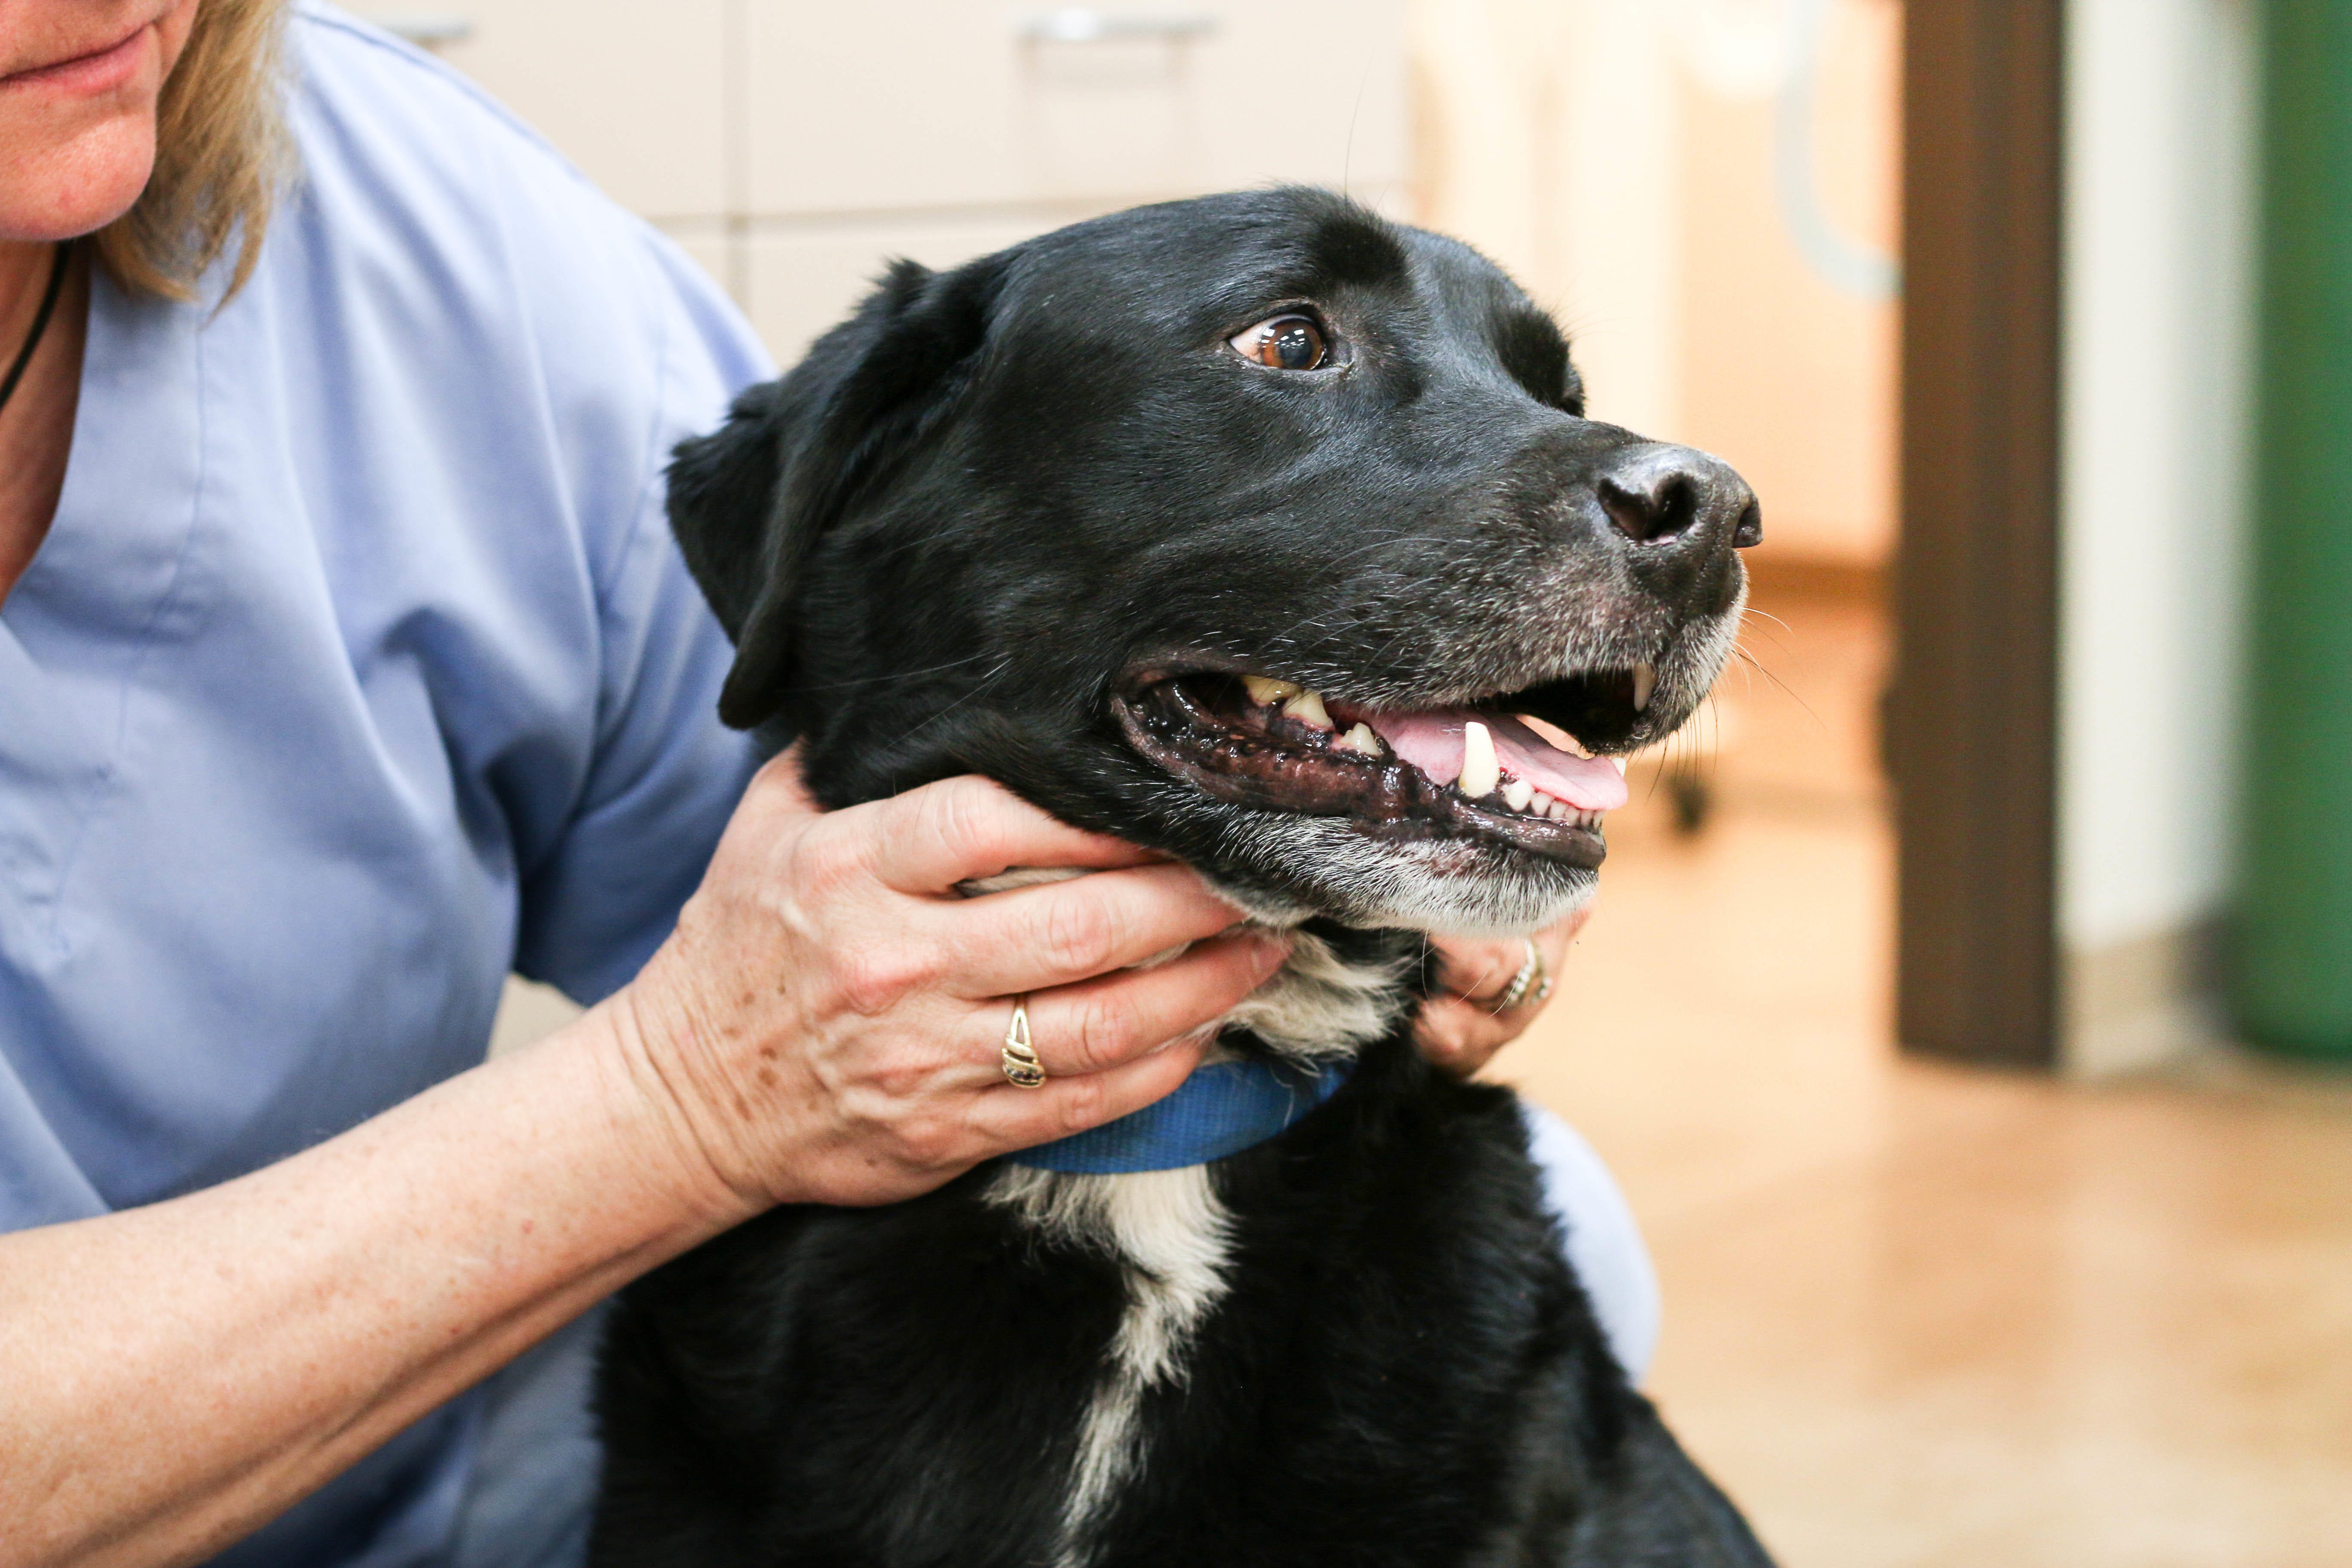 At Fourmile Veterinary Clinic, we believe every pet deserves to get the quality attention and medical care that will provide them with a long and comfortable life with you and your family.